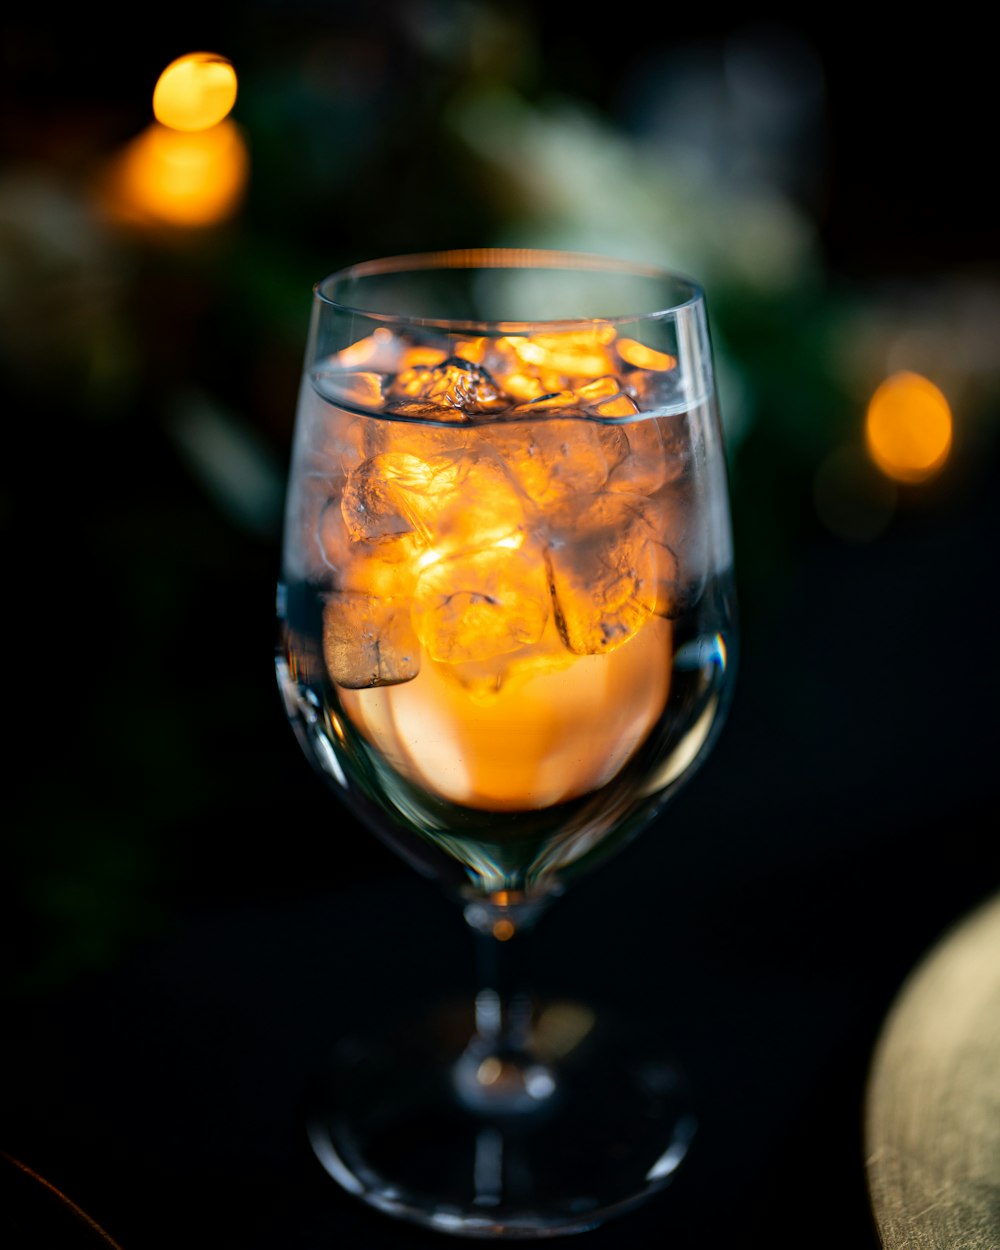 clear wine glass with yellow liquid